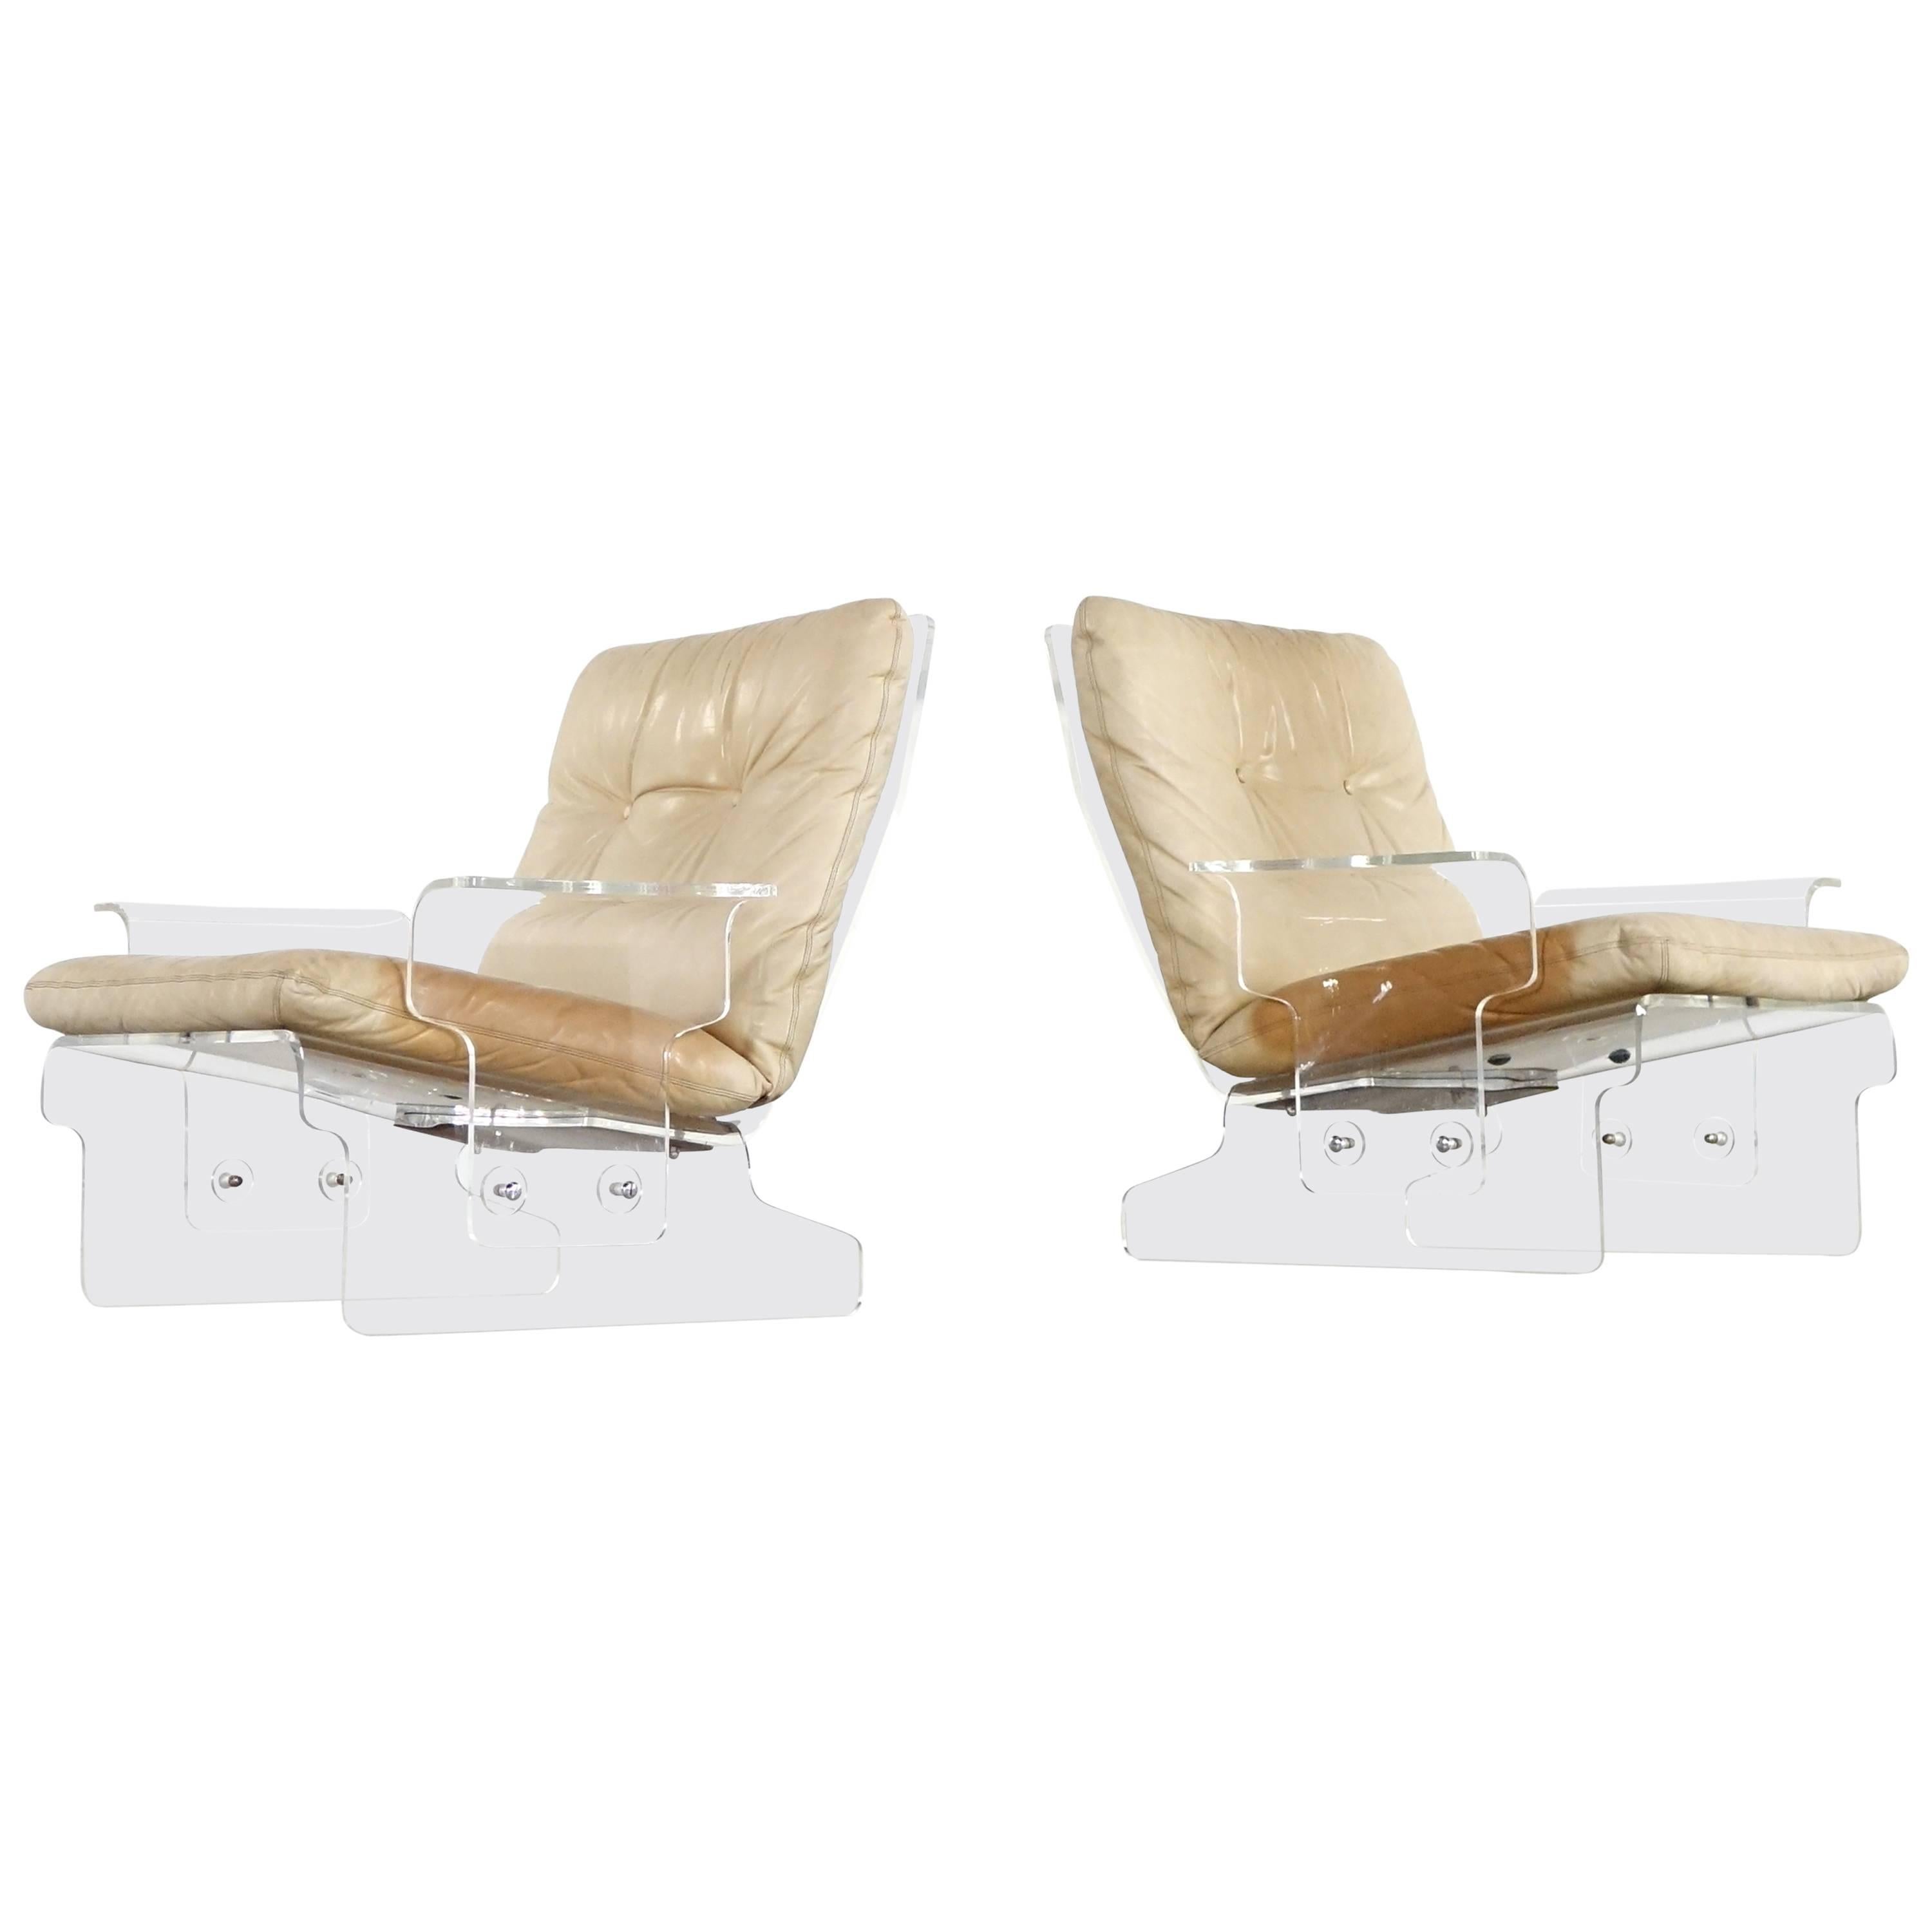 Two Lucite Baumann Lounge Chair, Sleigh System 1966, Leather Padded Acrylic